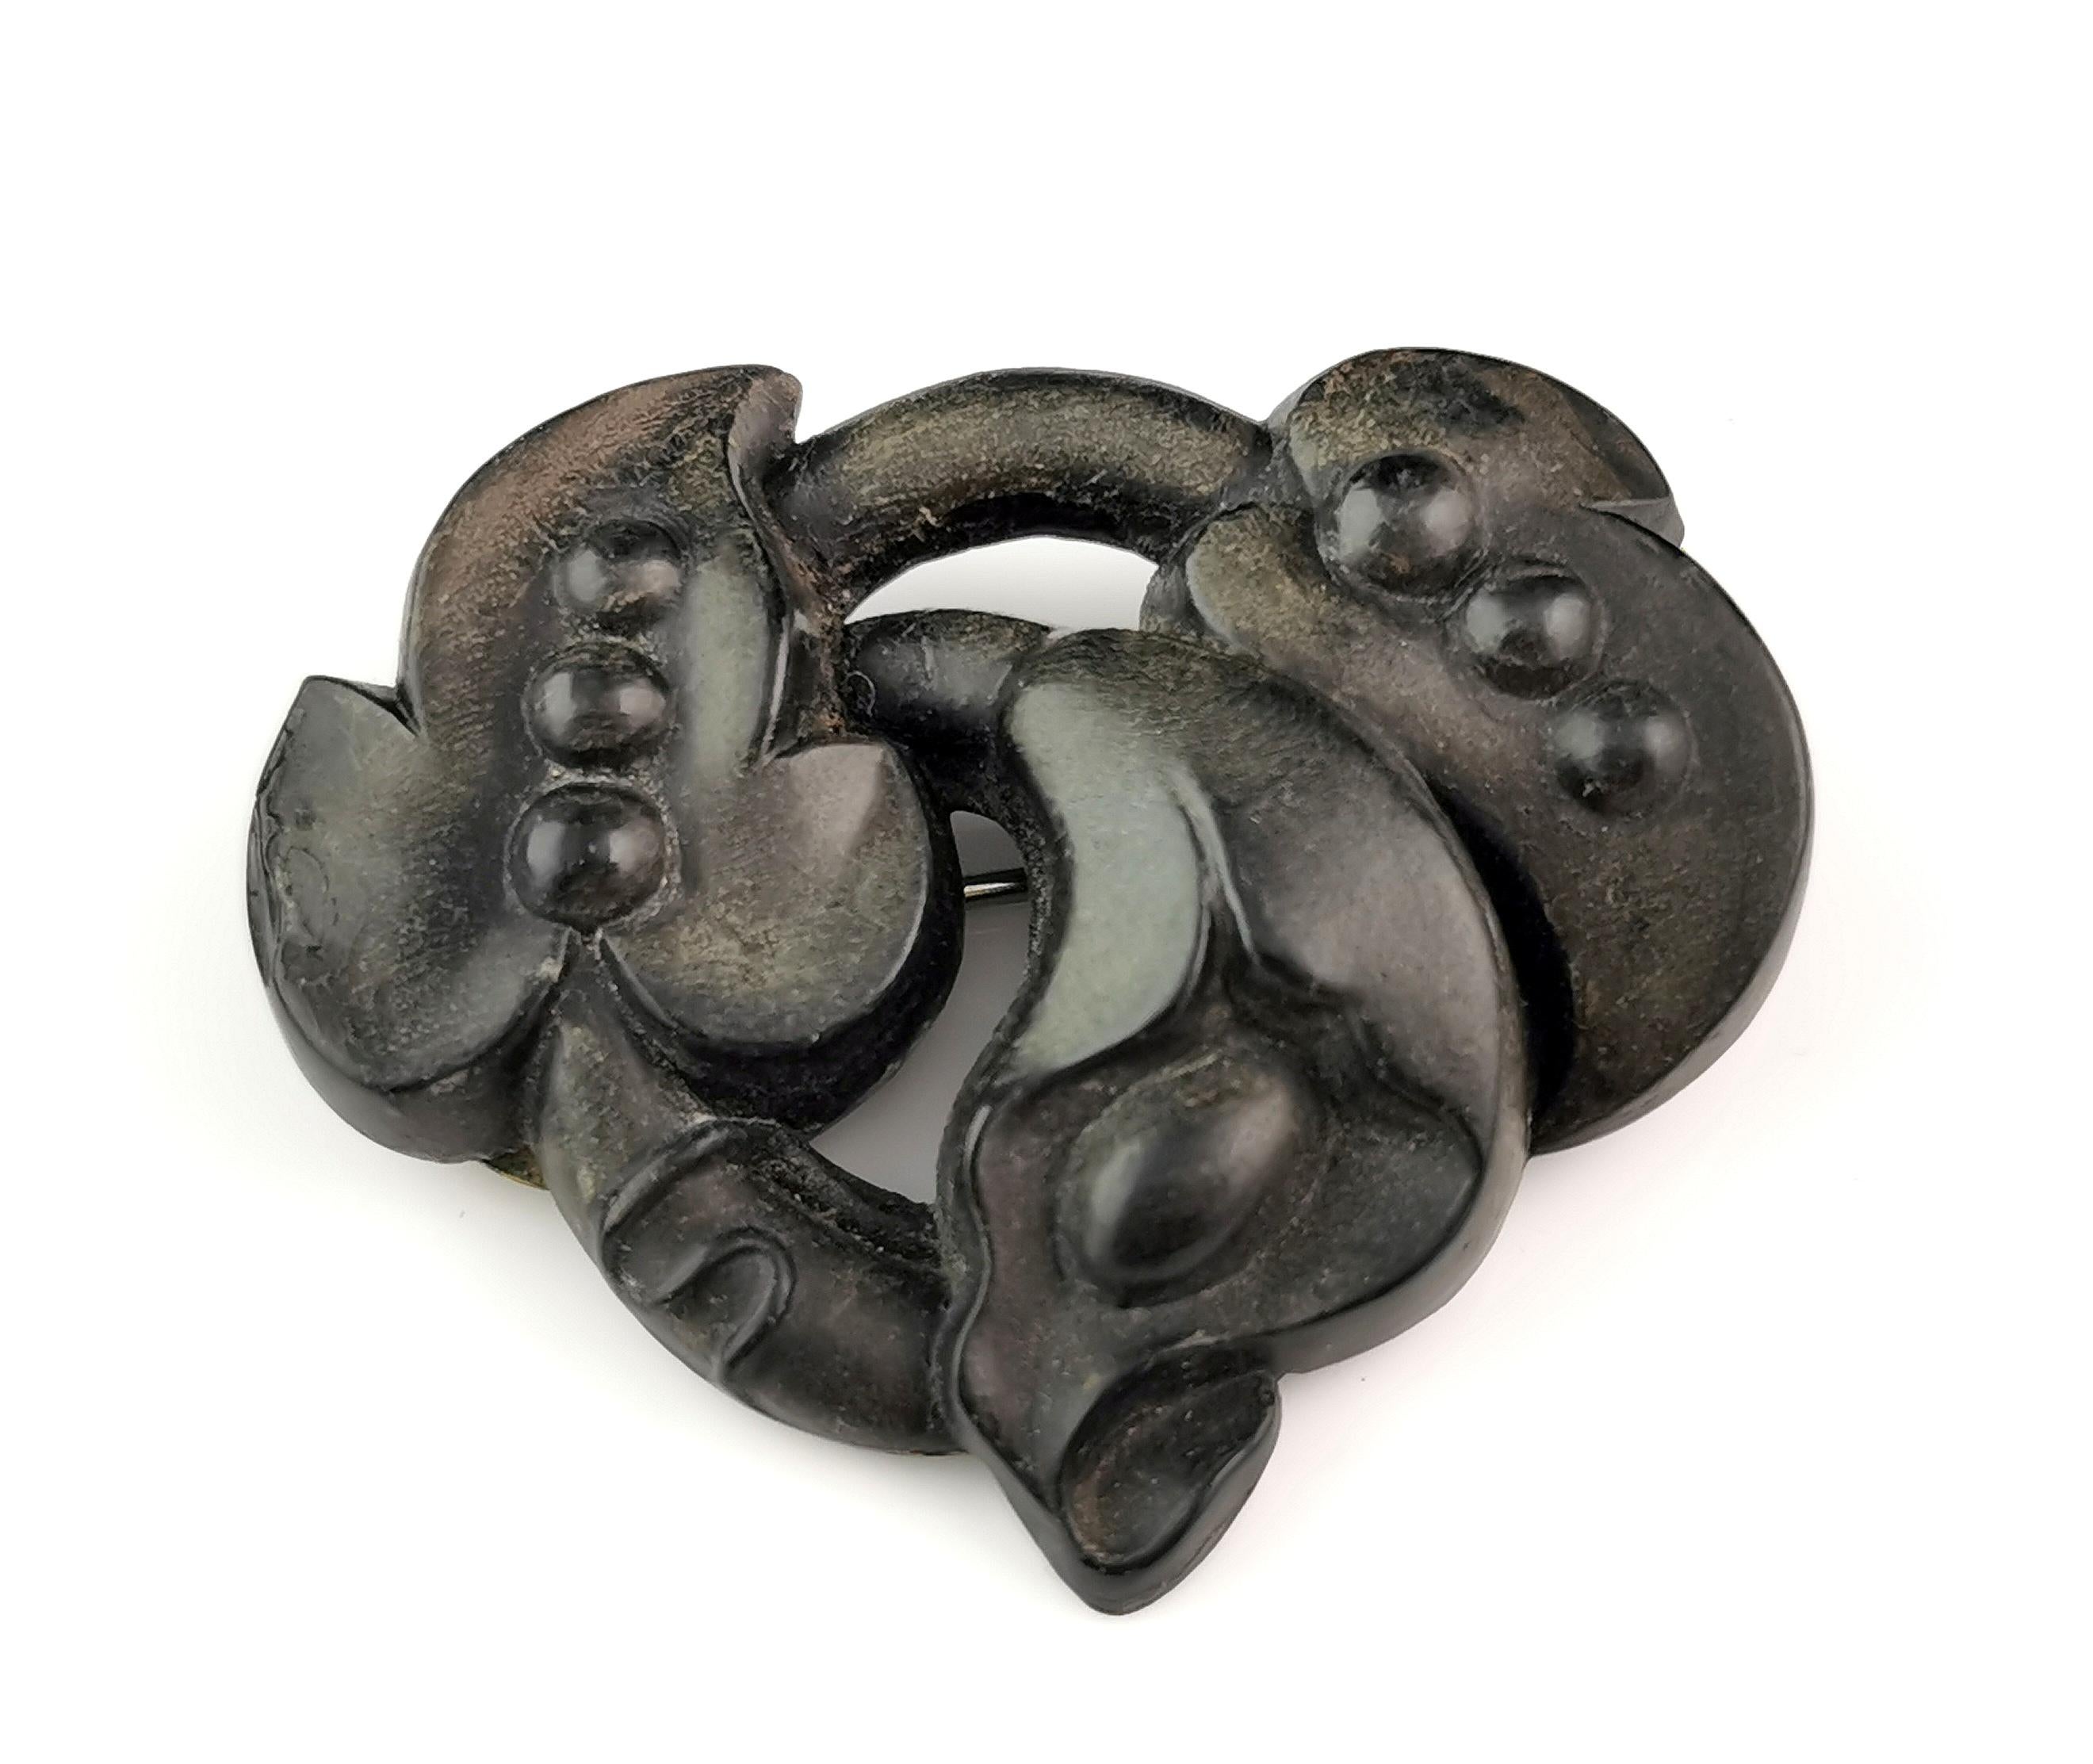 A beautiful antique Victorian bog oak floral brooch.

It is crafted from bog oak which is a type of oak wood that has been buried in a peat bog for hundreds sometimes thousands of years with a rich deep brown / black colour.

It was used in the